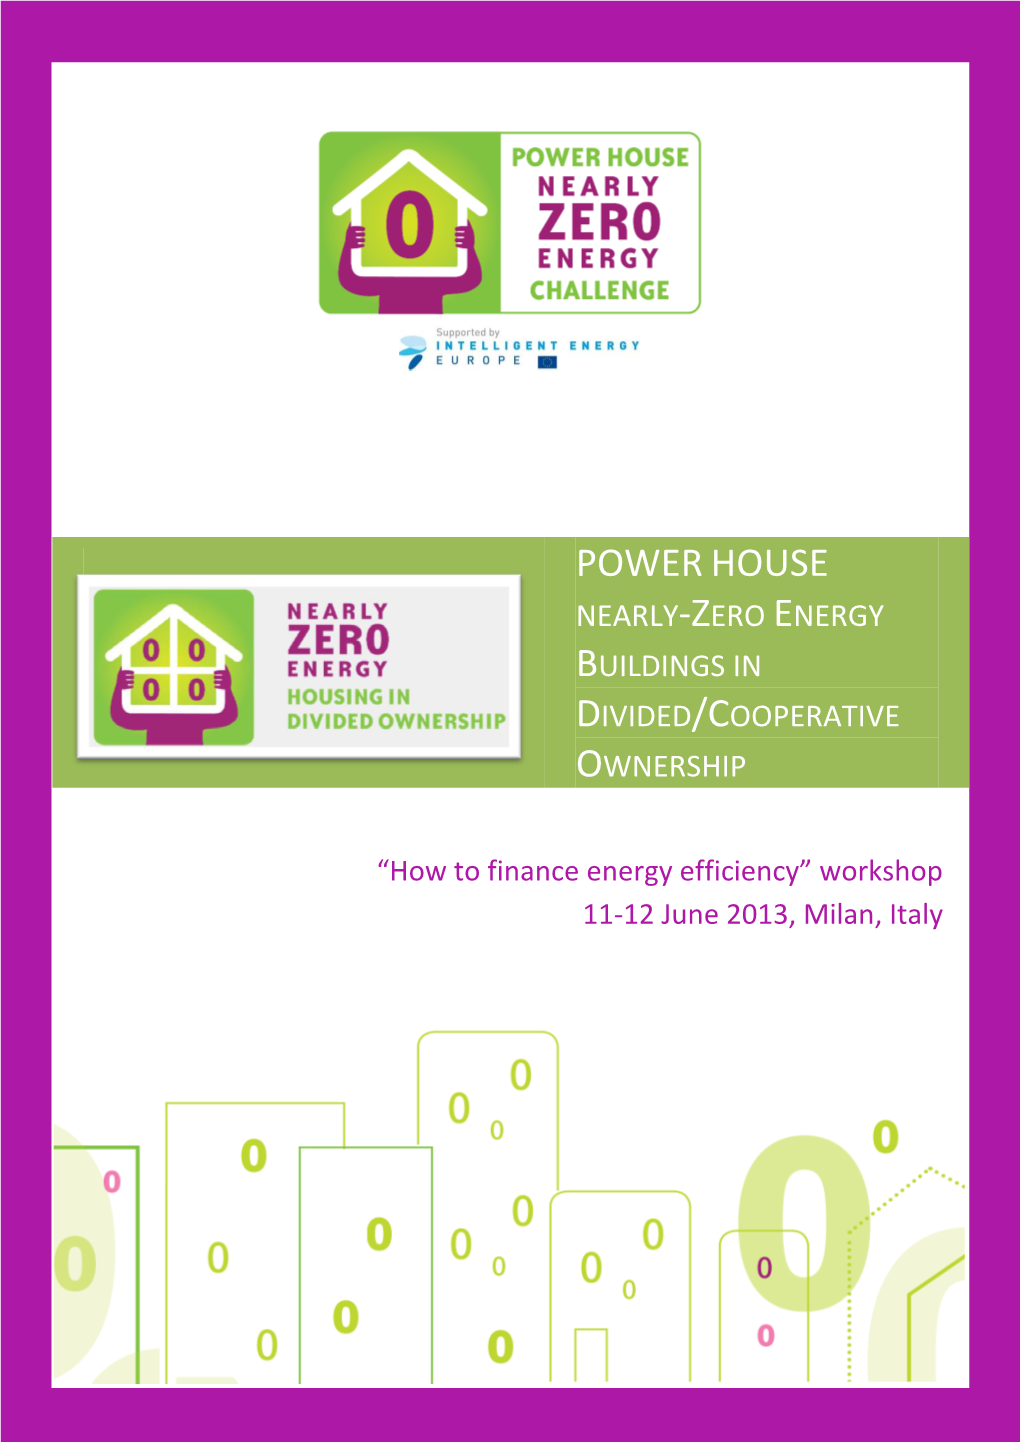 Power House Nearly-Zero Energy Buildings in Divided/Cooperative Ownership